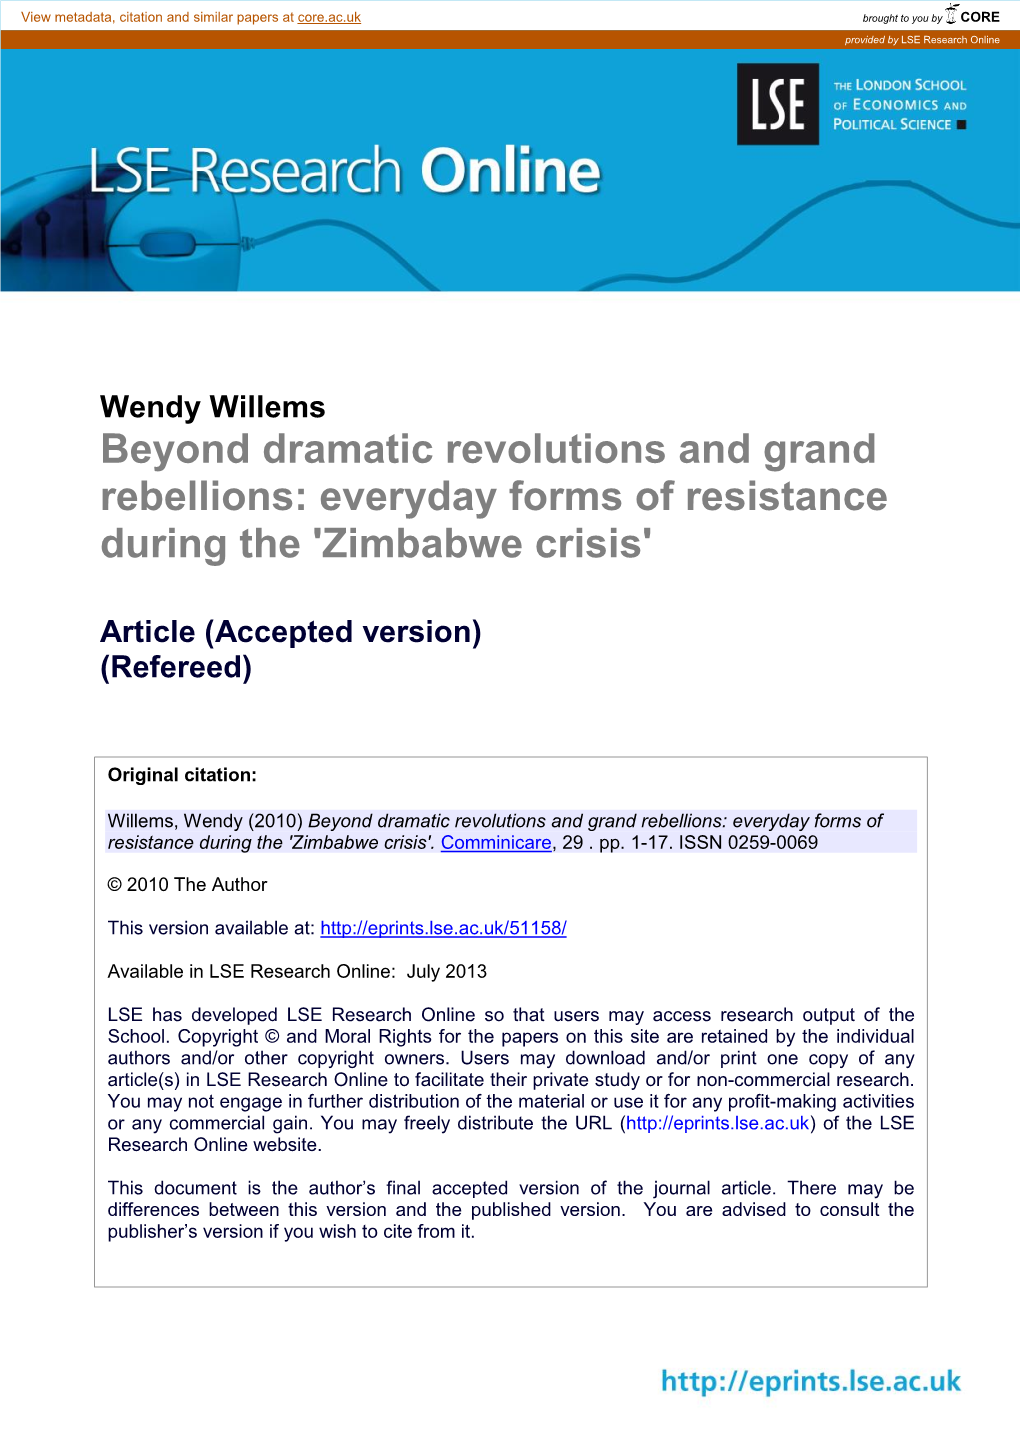 Beyond Dramatic Revolutions and Grand Rebellions: Everyday Forms of Resistance During the 'Zimbabwe Crisis'